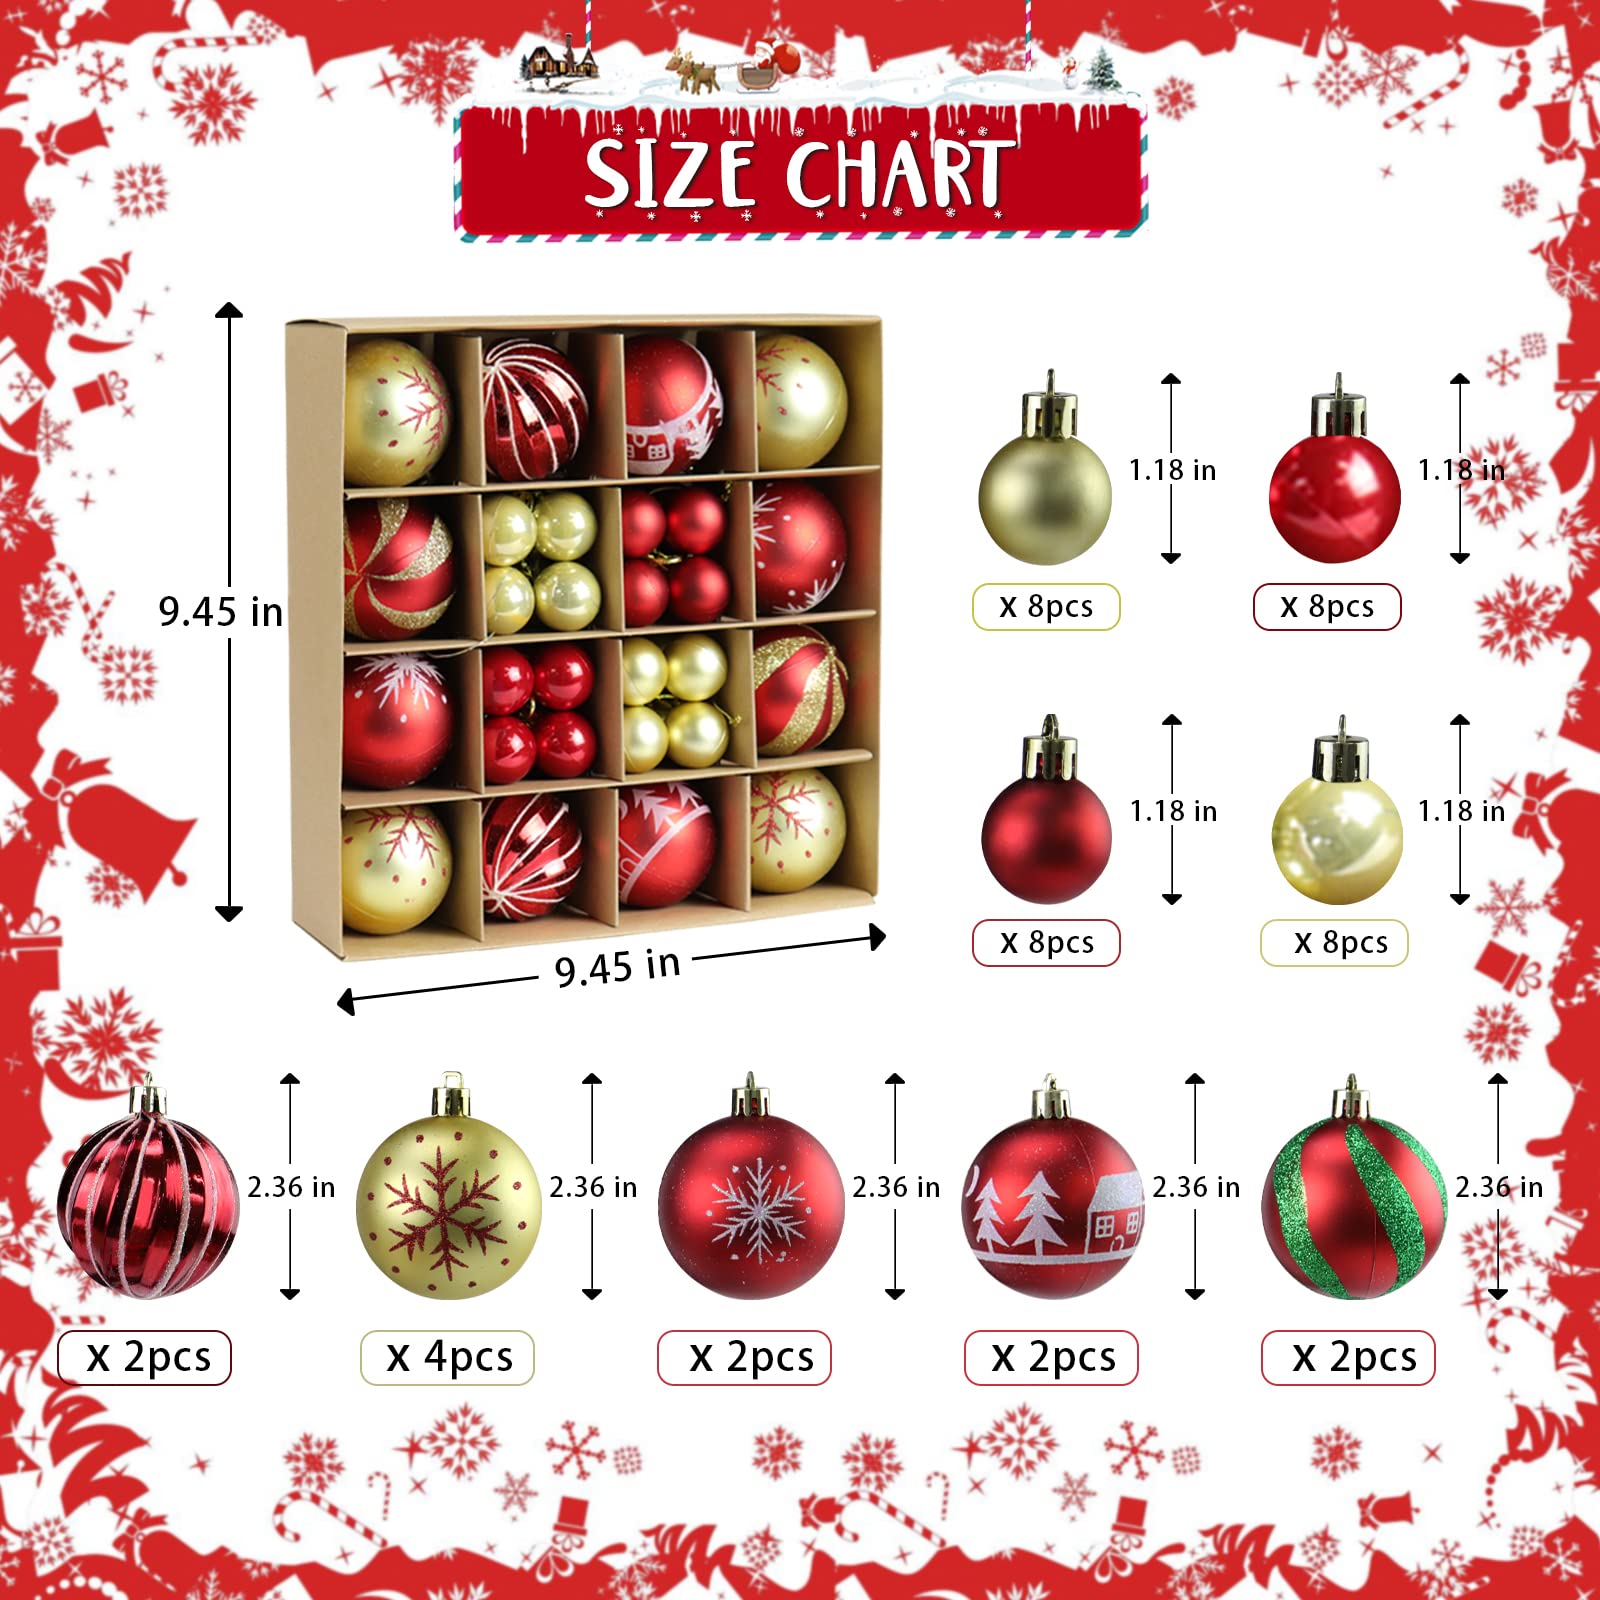 Christmas Balls,Christmas Tree Decorations Ornaments Set,44pcs Shatterproof Plastic Decorative Hanging Ball for Xmas Party Holiday Wedding (Red and Gold)